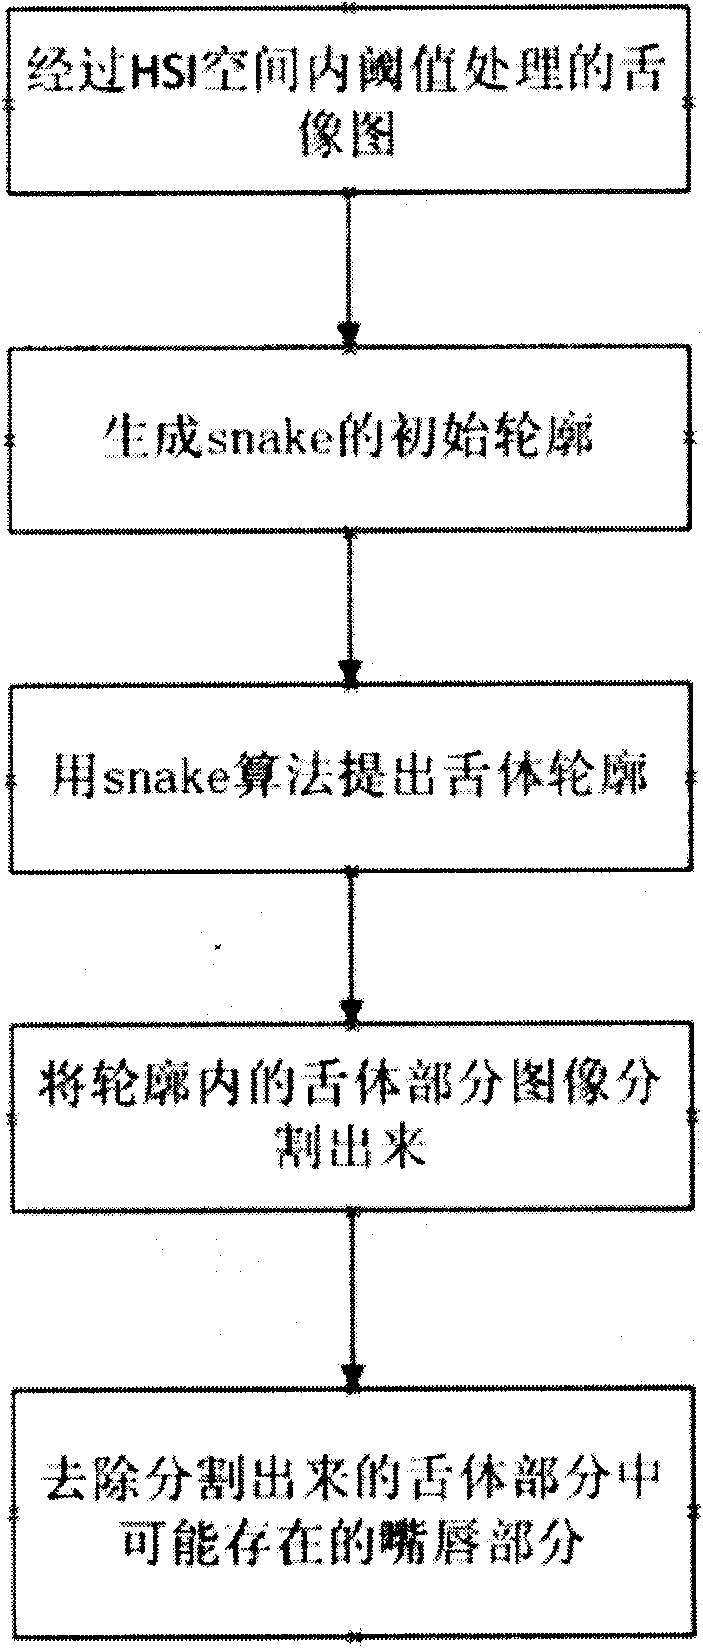 Tongue picture profile extracting method and application thereof